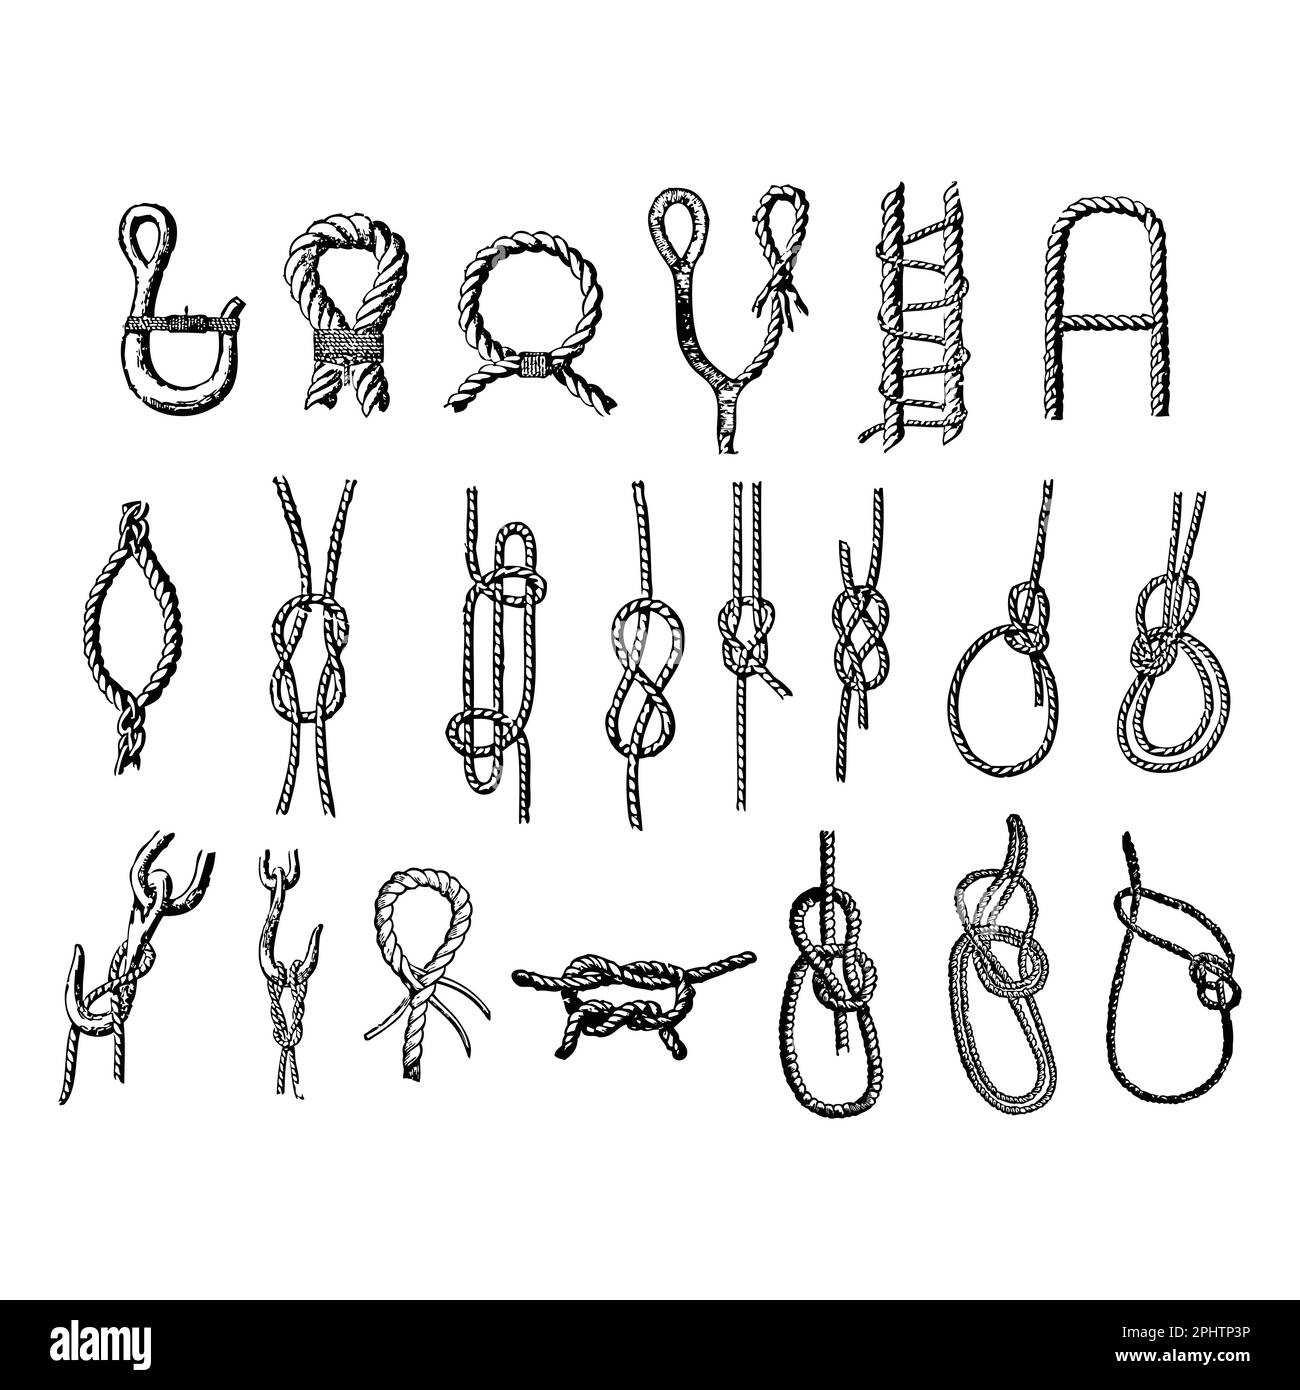 Set of rope icons. Hand drawn vector illustration isolated on white background. Stock Vector